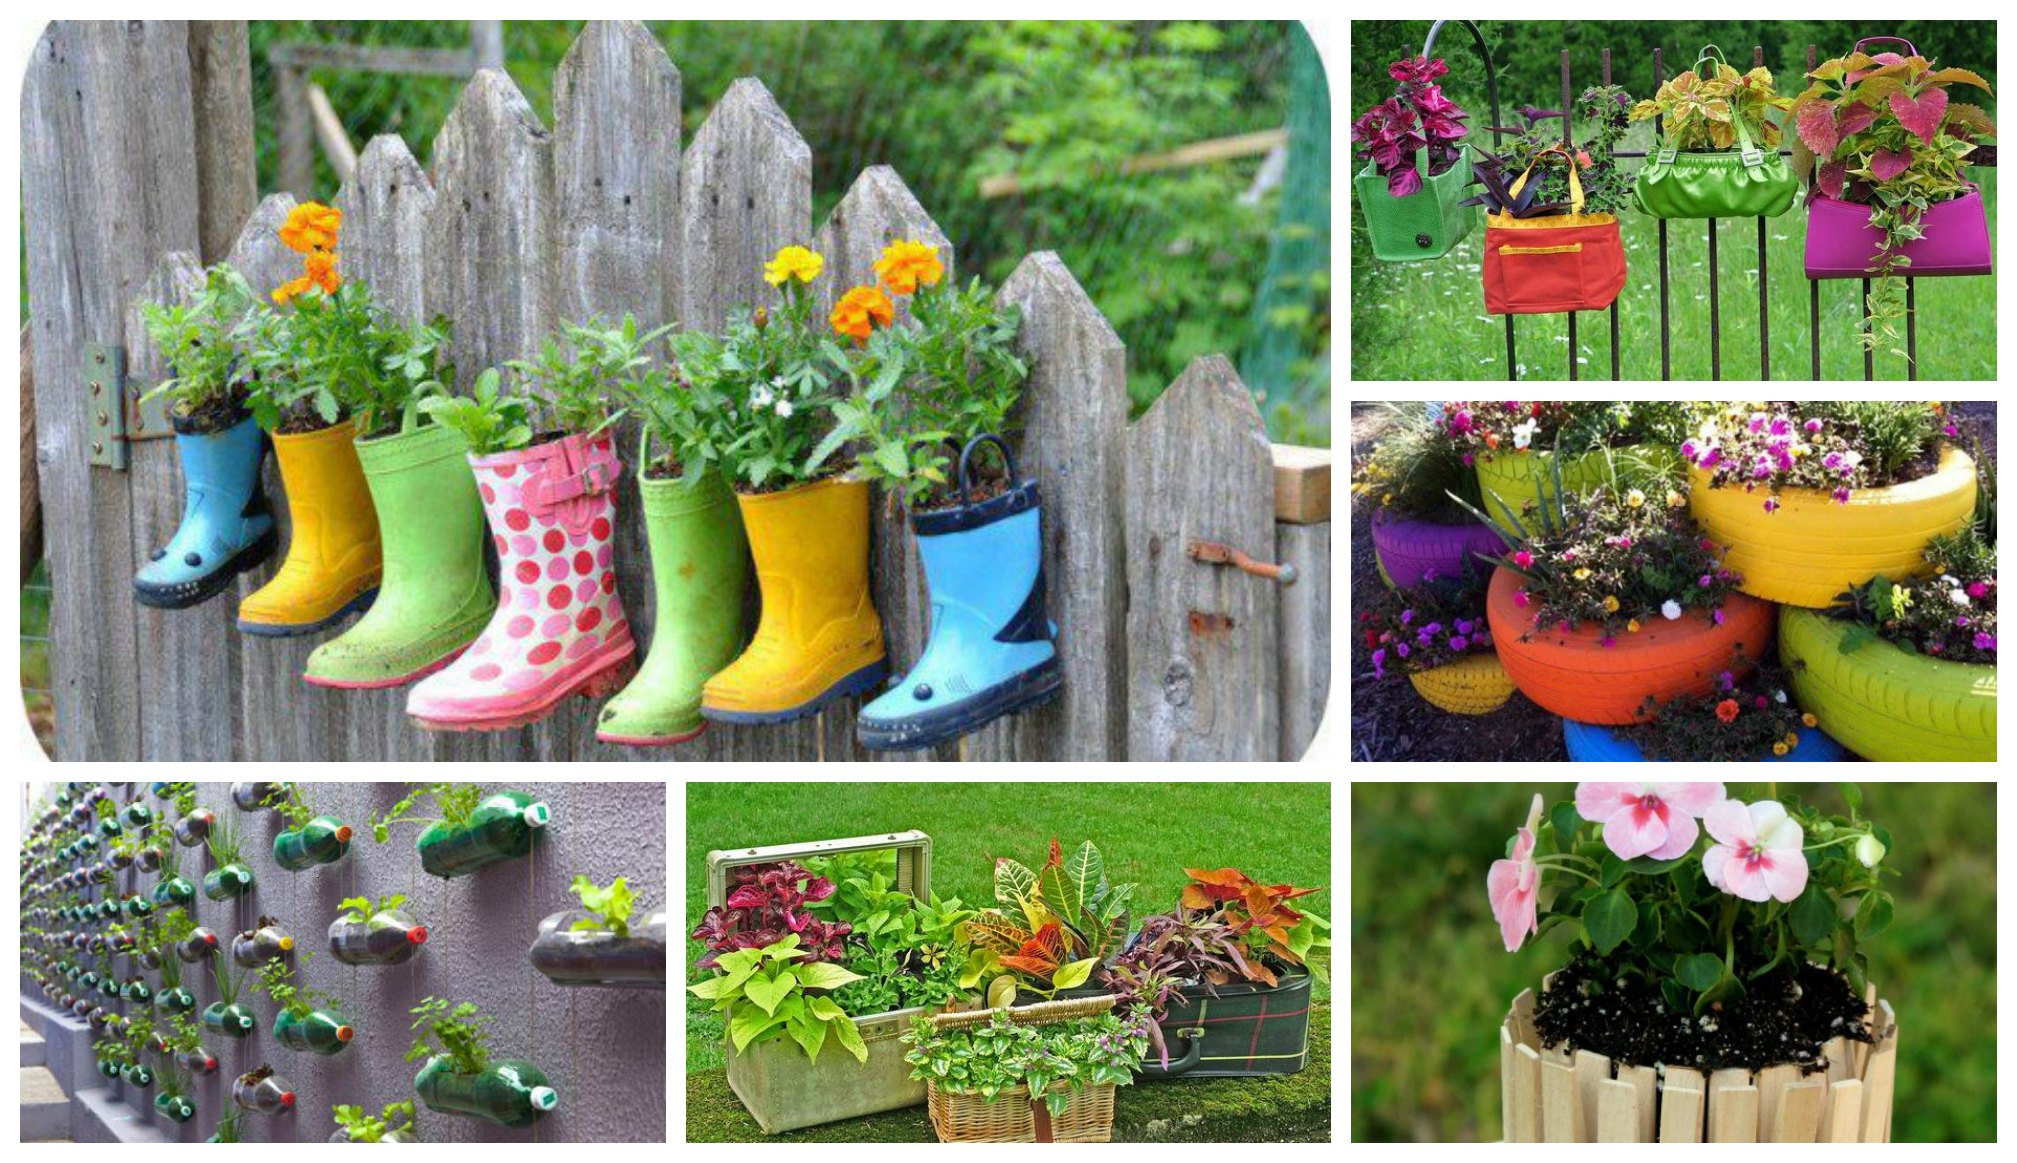 15 DIY Ideas: Turn Old Things Into Beautiful Flower Pots and Planters